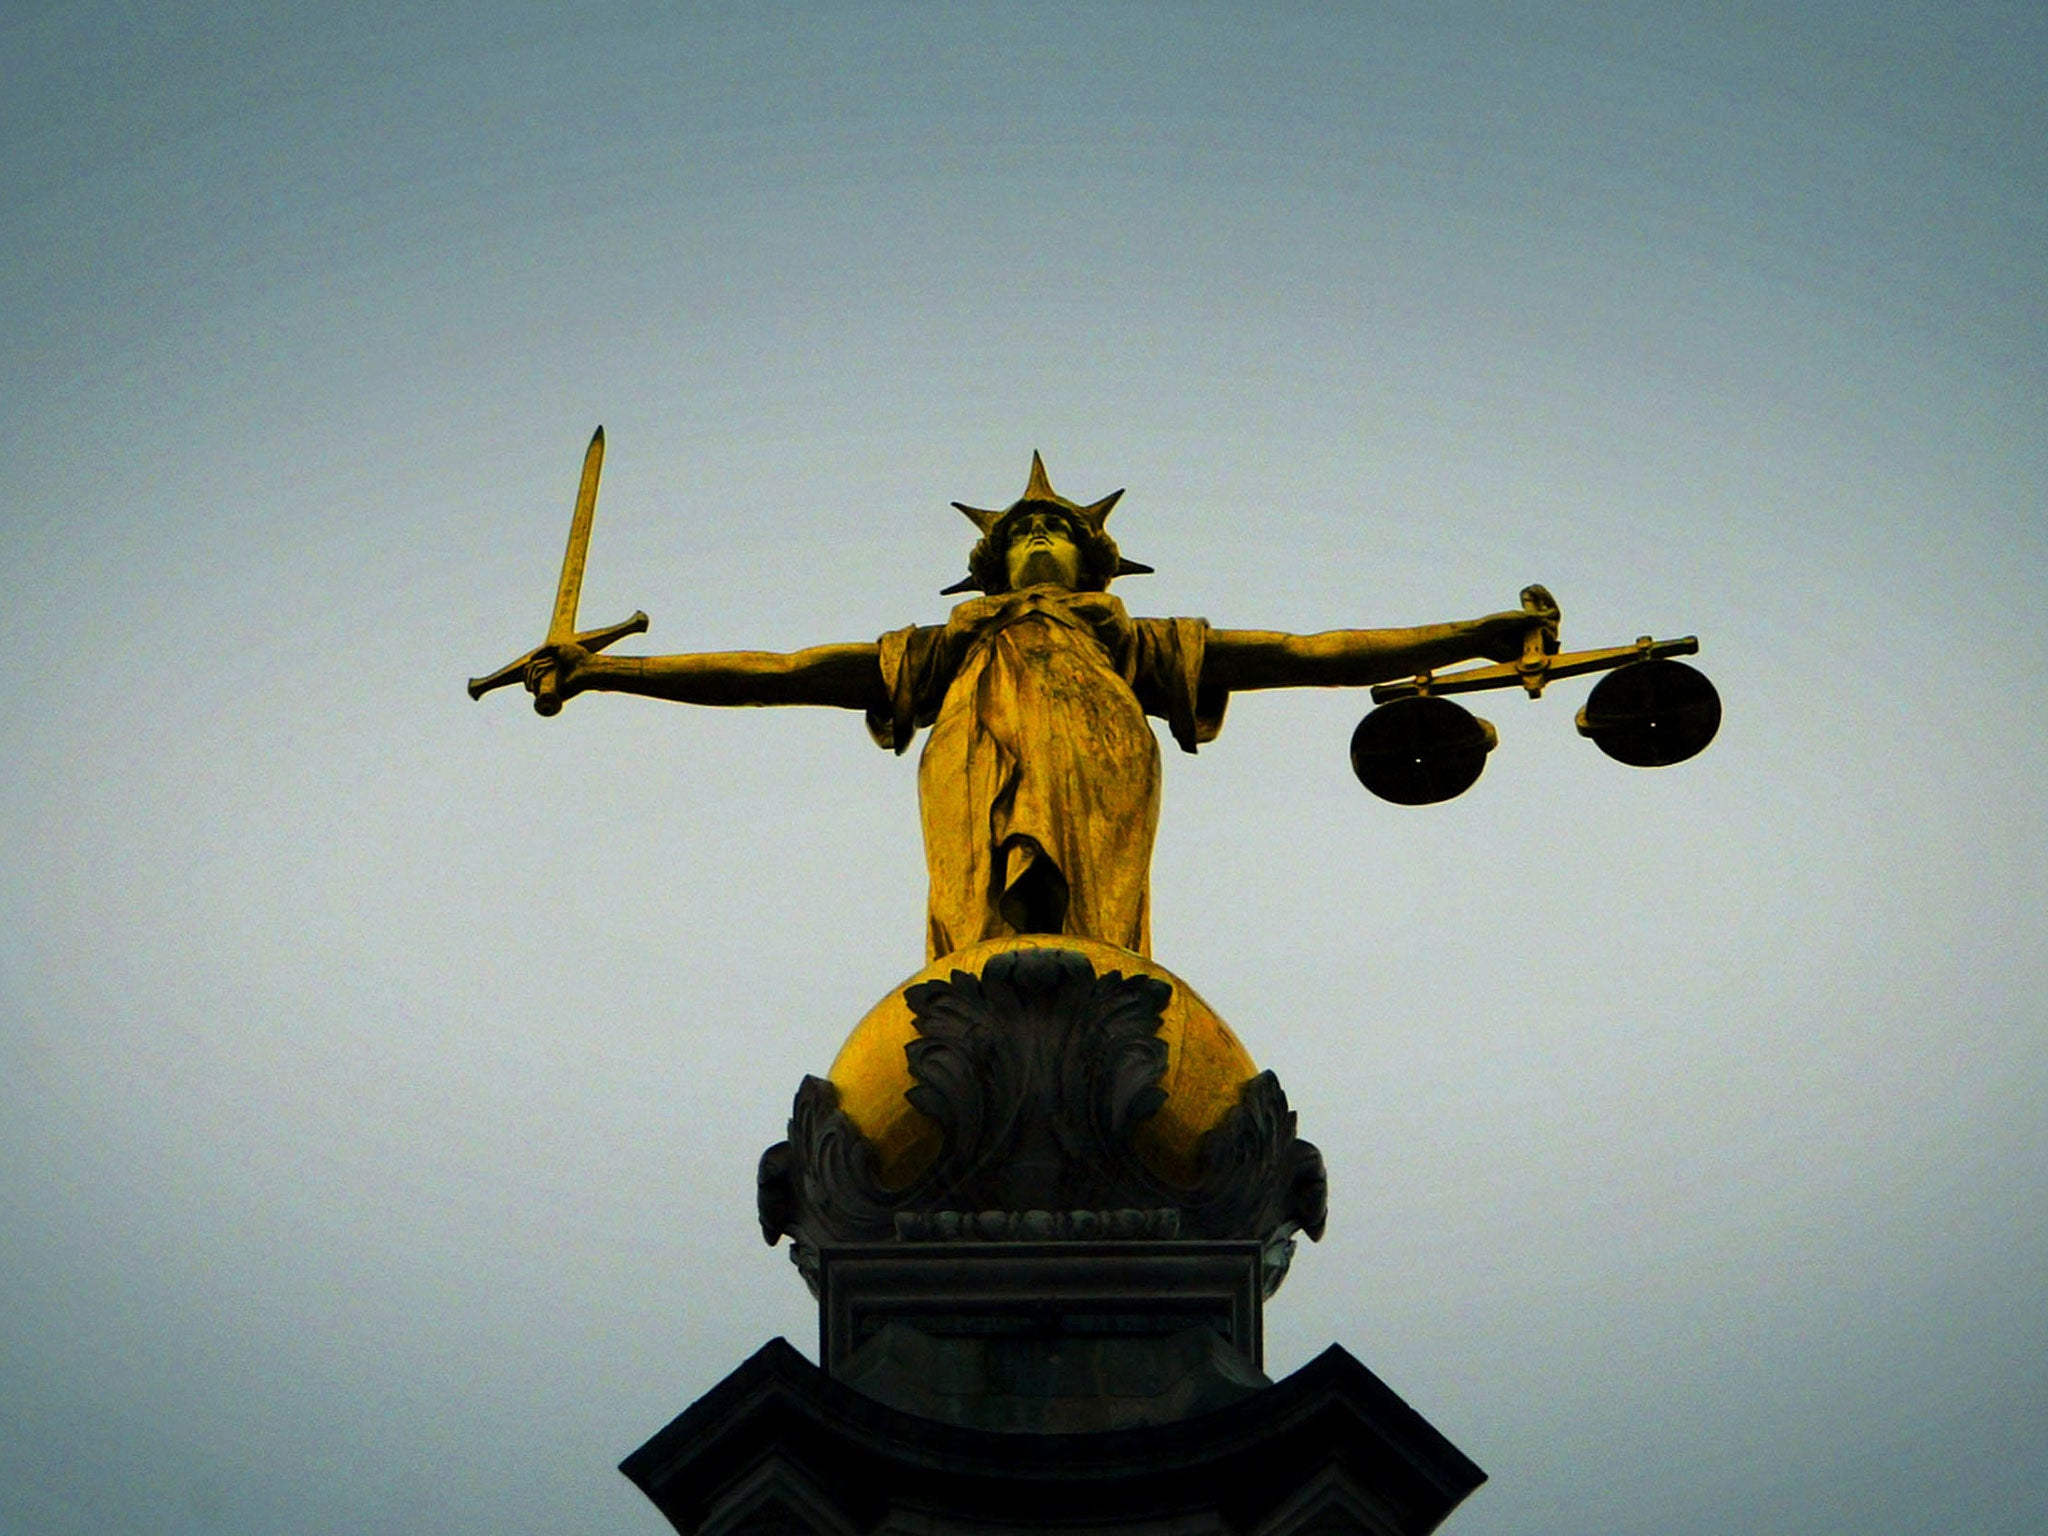 A statue of the scales of justice stands high above the Old Bailey